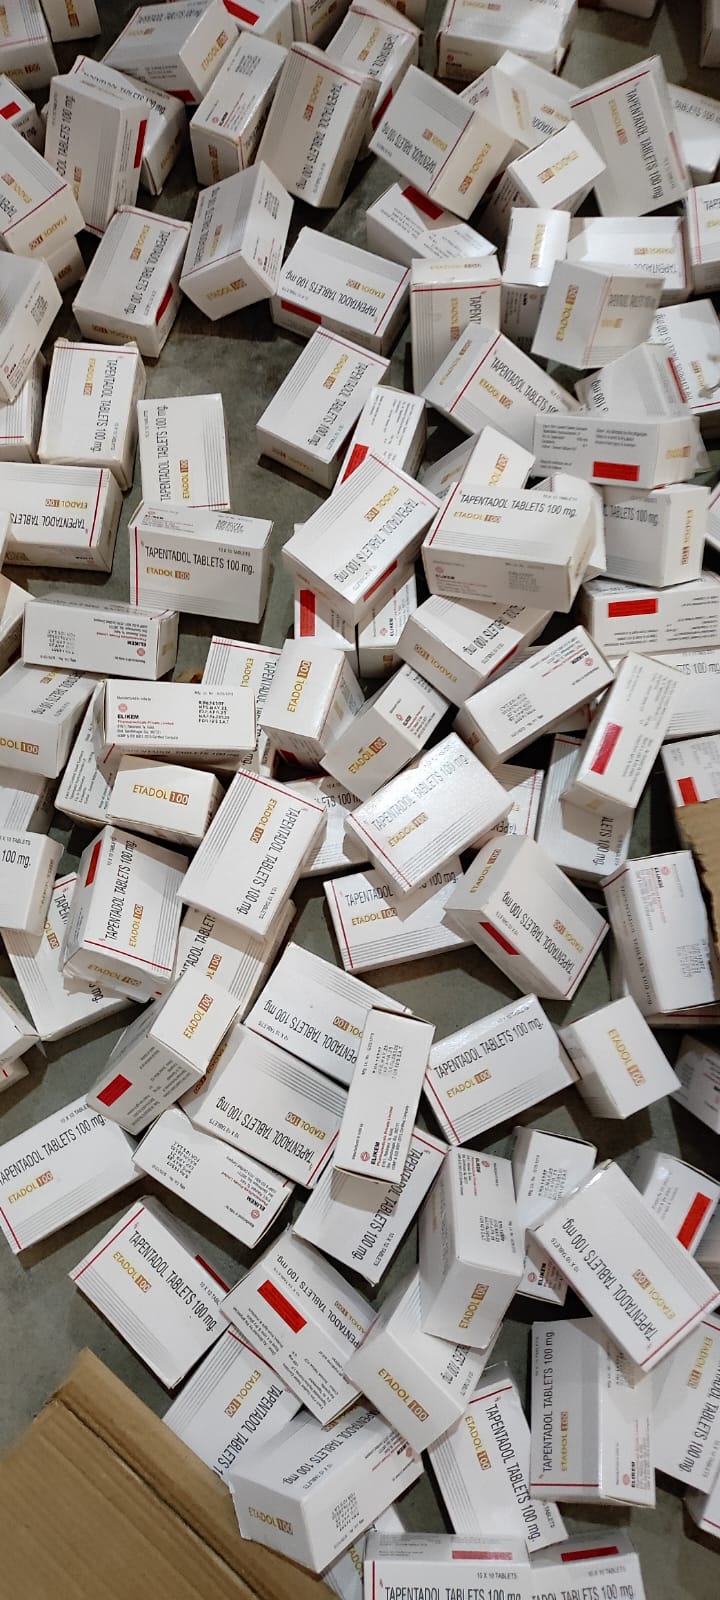 23k tablets of different brands of Tapentadol worth Rs 6.7 lac seized in Srinagar